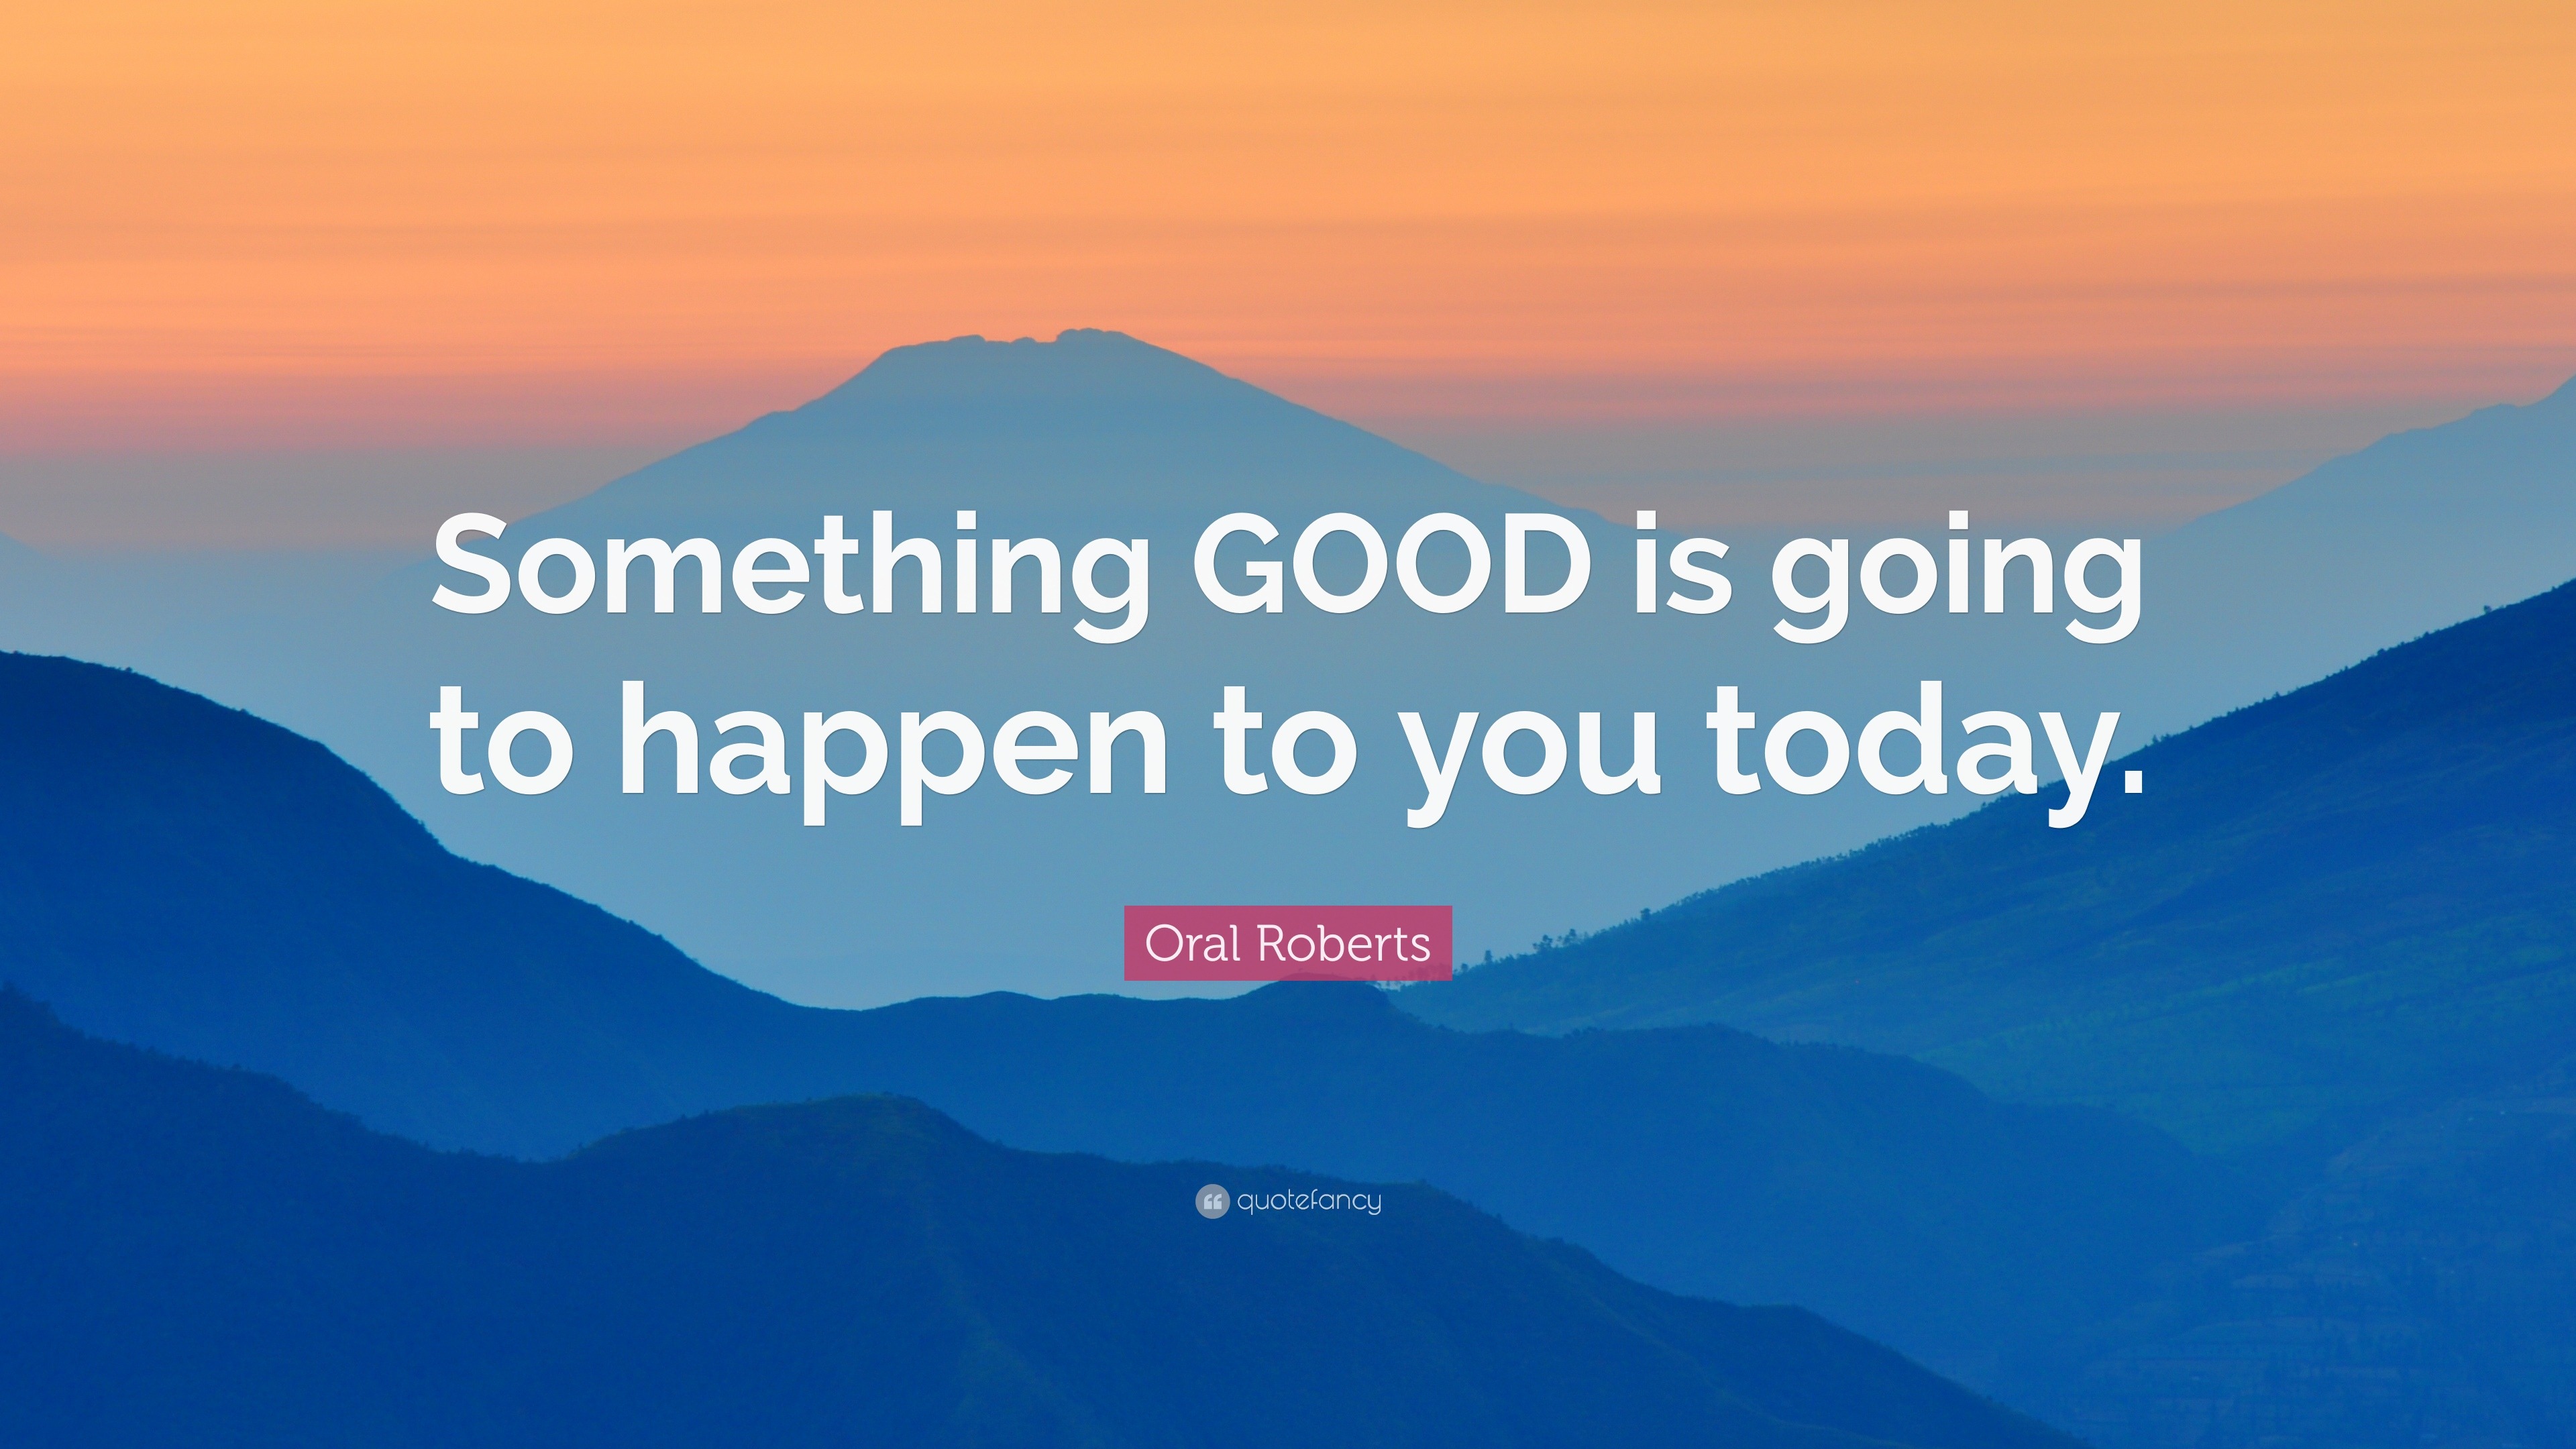 Oral Roberts Quote: “Something Good Is Going To Happen To You Today.”